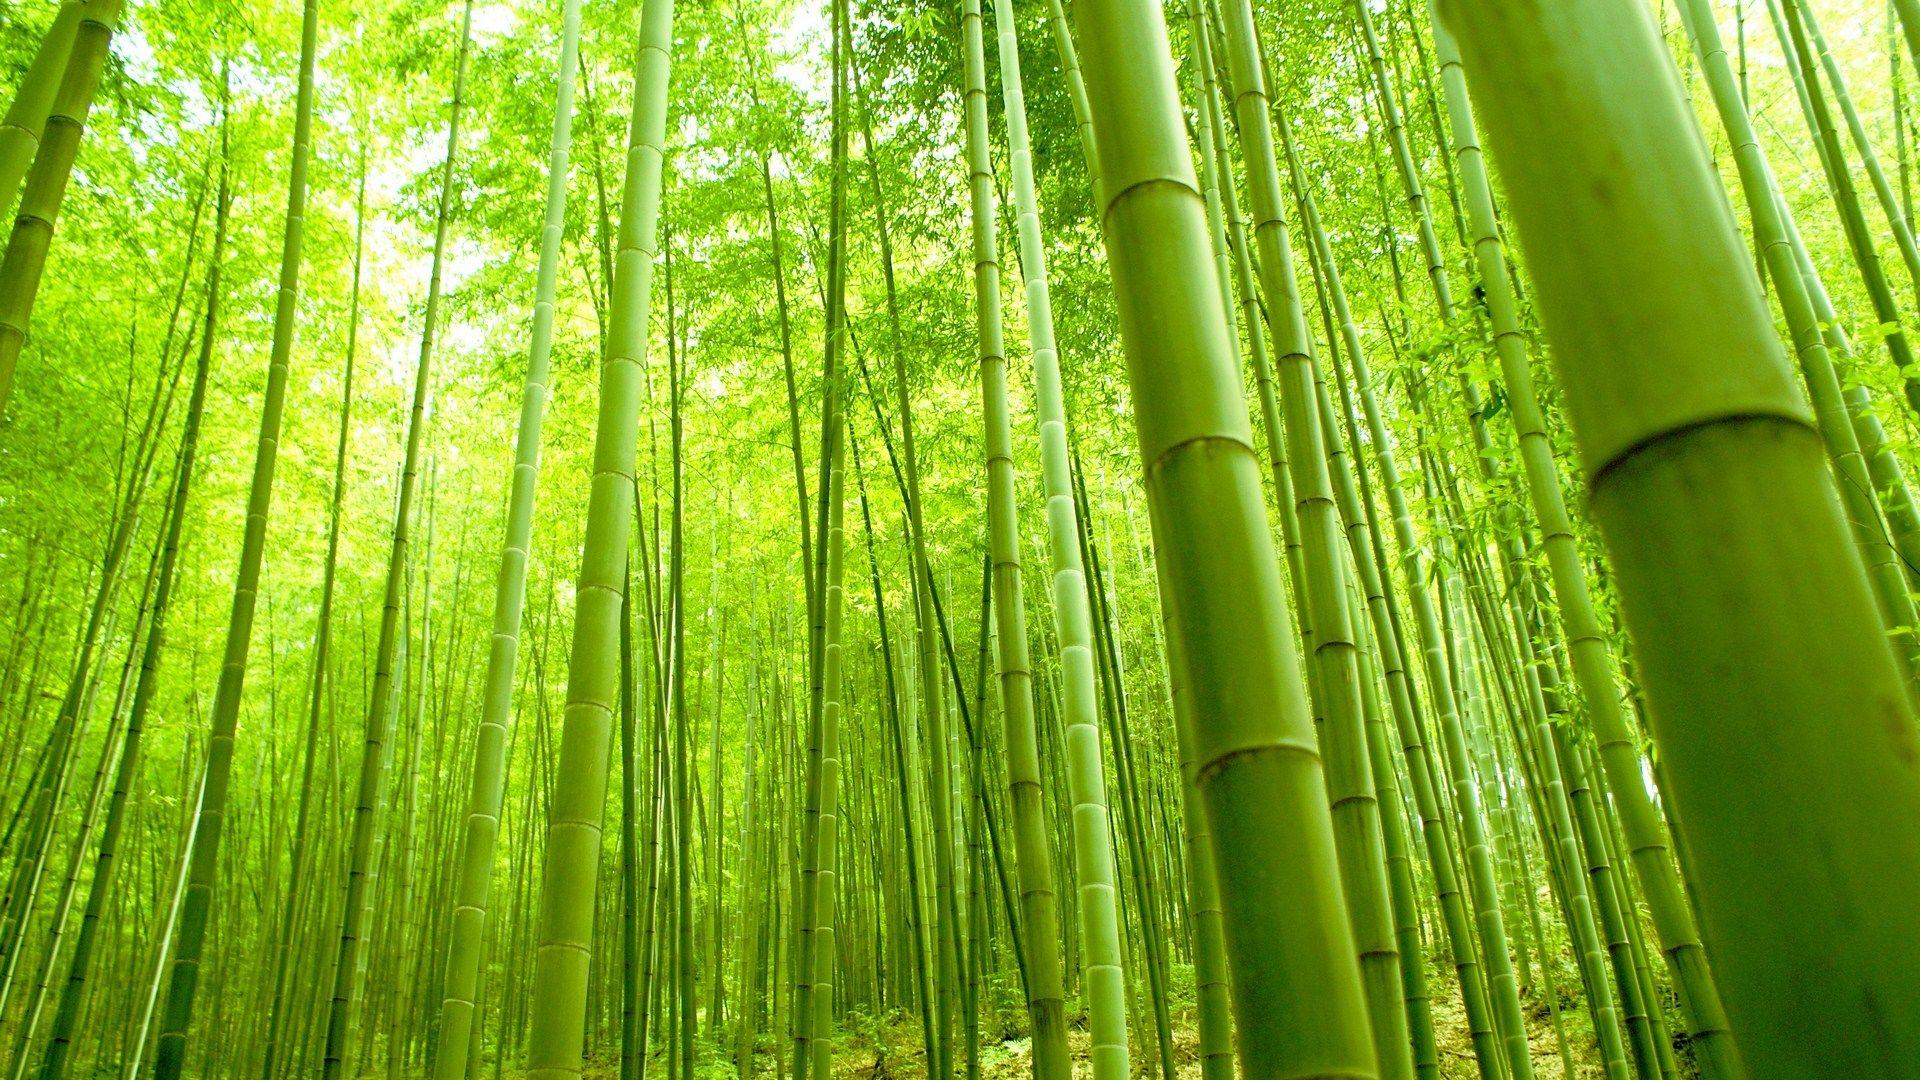 4546095 trees, bamboo - Rare Gallery HD Wallpapers